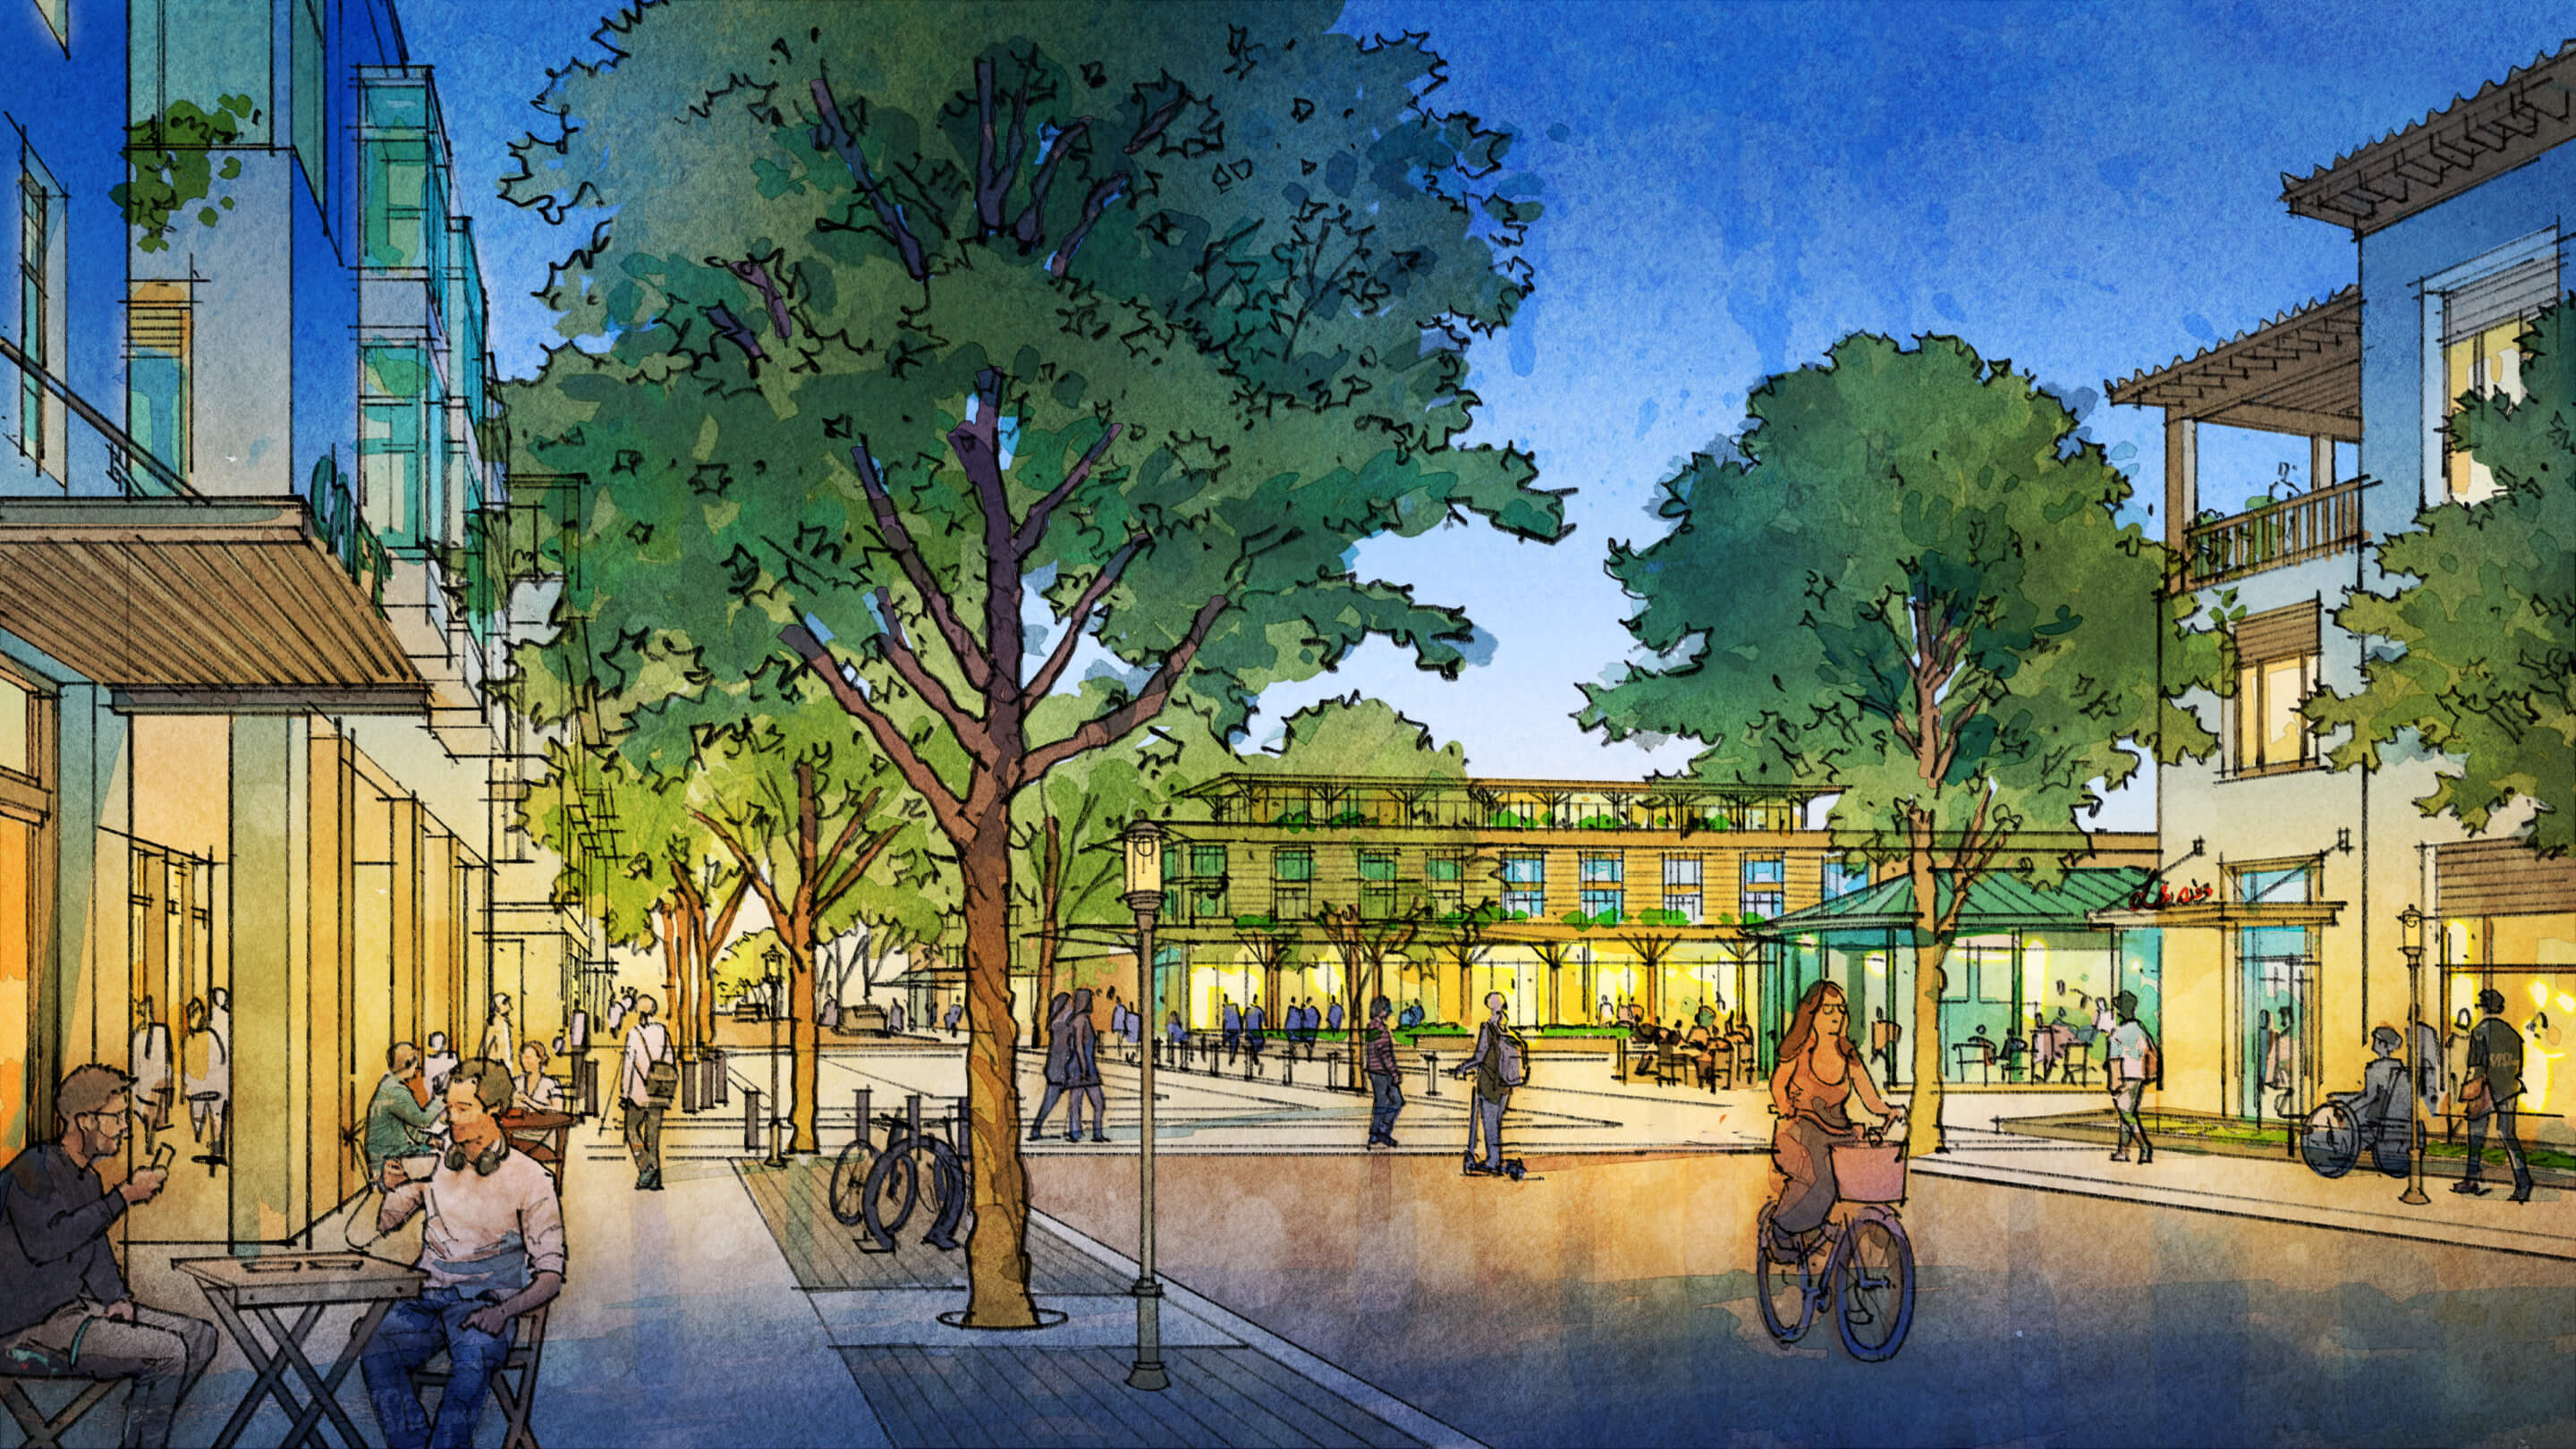 watercolor rendering of a bustling pedestrianized street